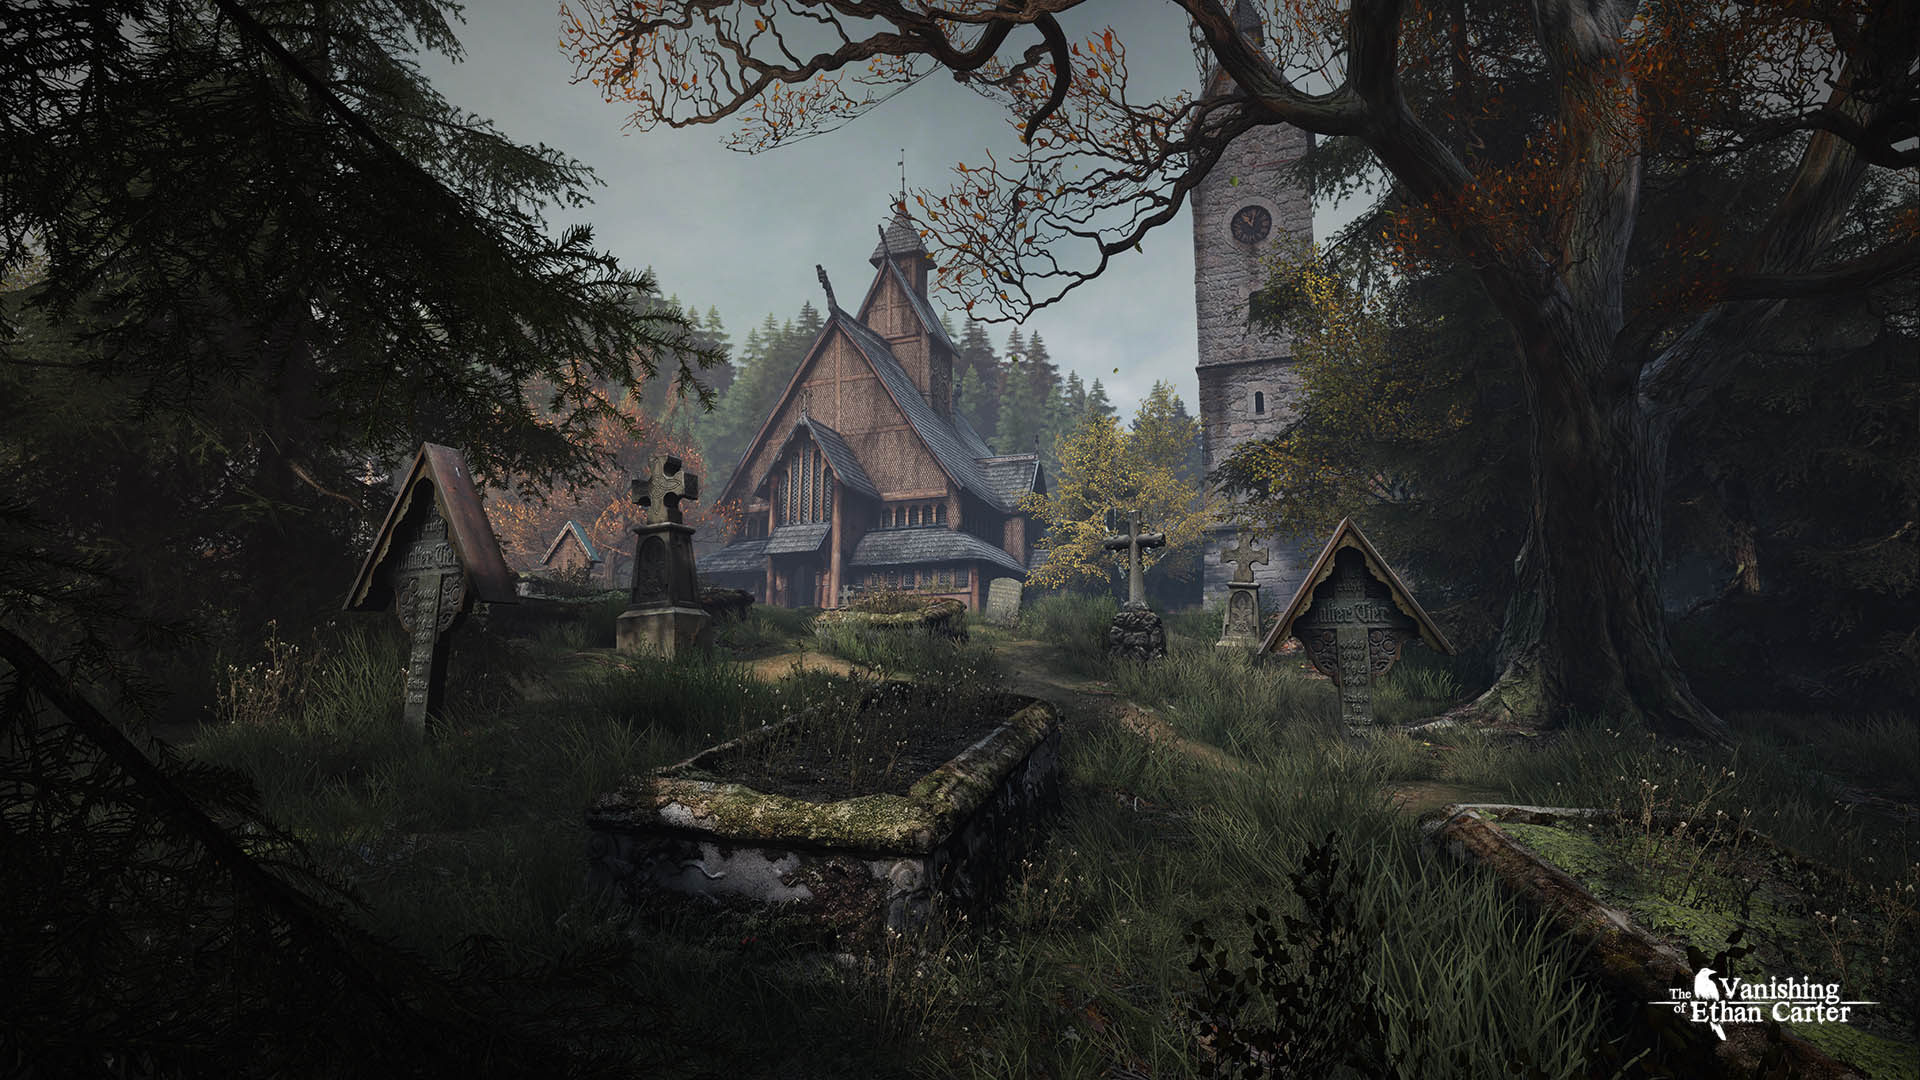 The Vanishing Of Ethan Carter  Backgrounds, Compatible - PC, Mobile, Gadgets| 1920x1080 px